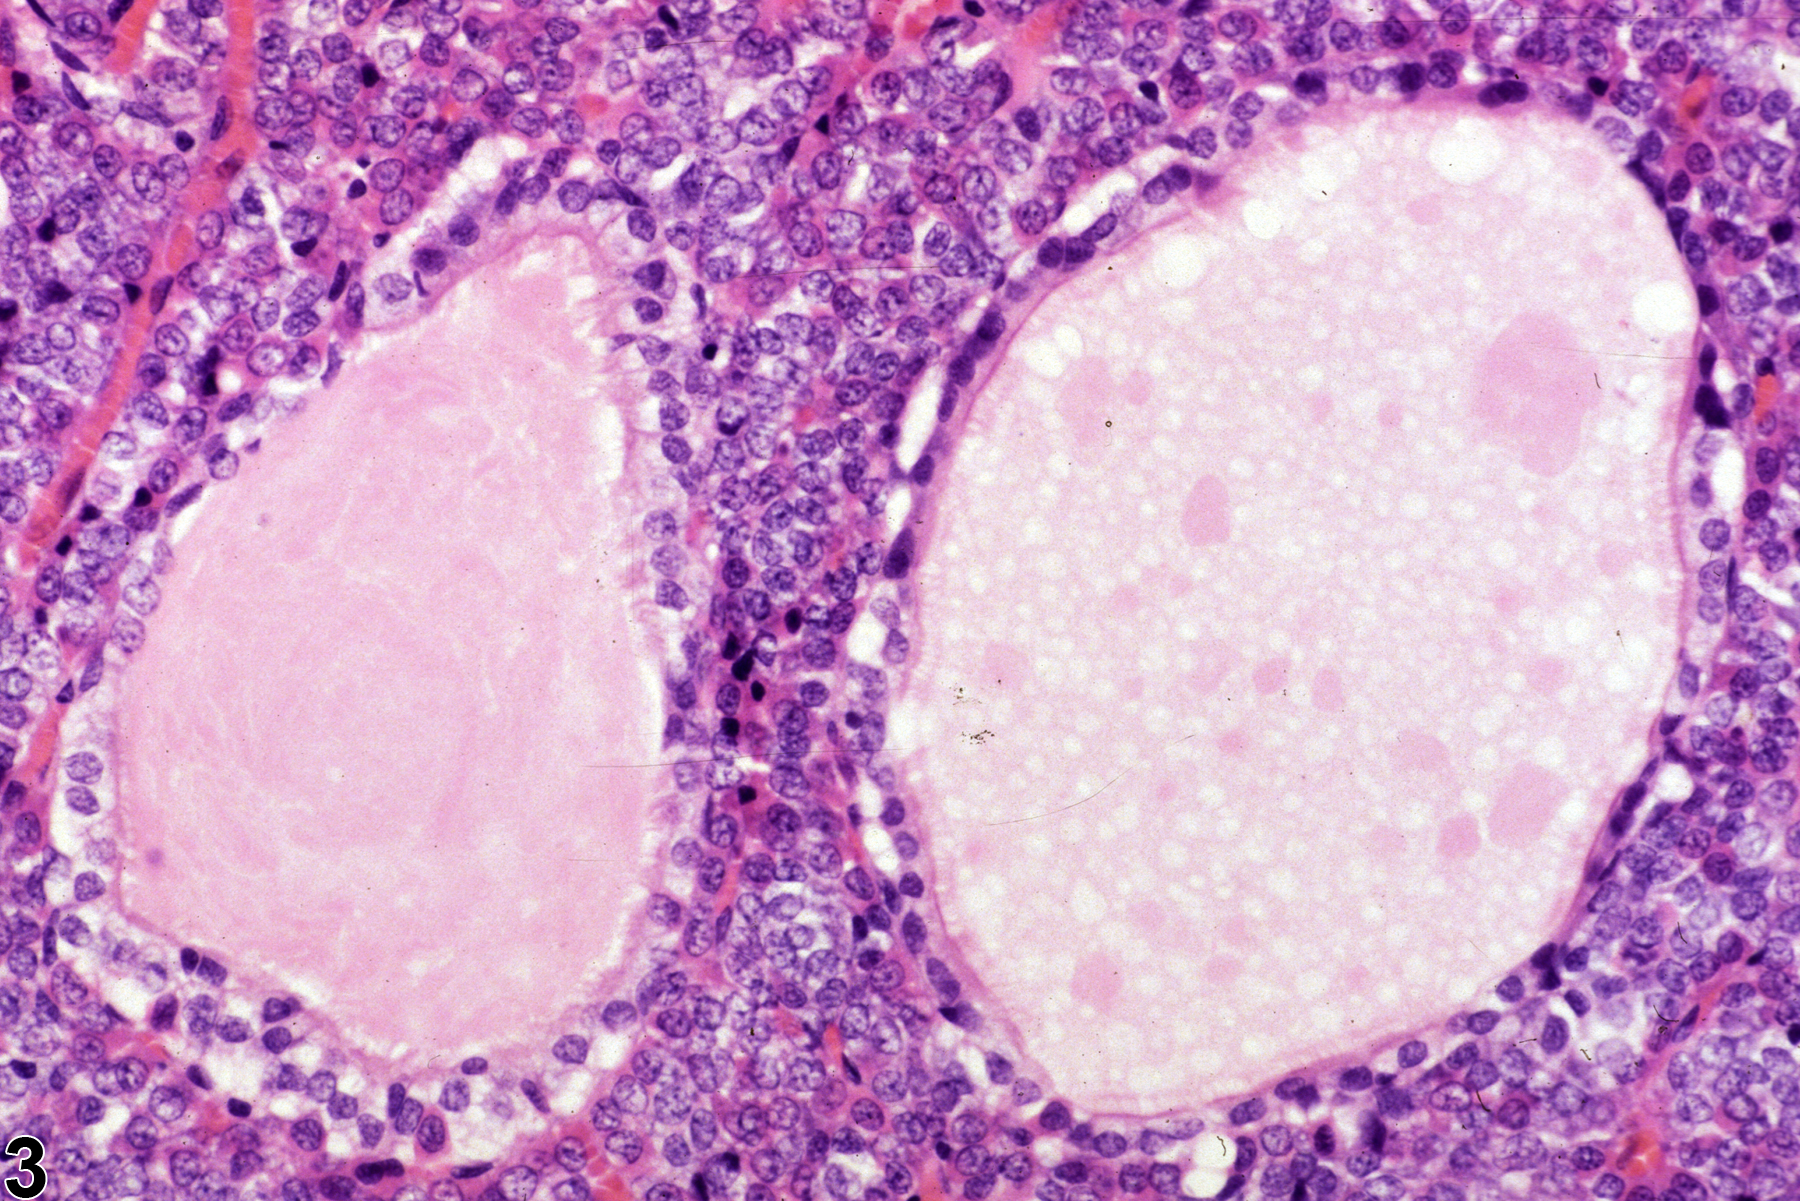 Image of cyst in the pituitary gland from a male F344/N rat in a chronic study